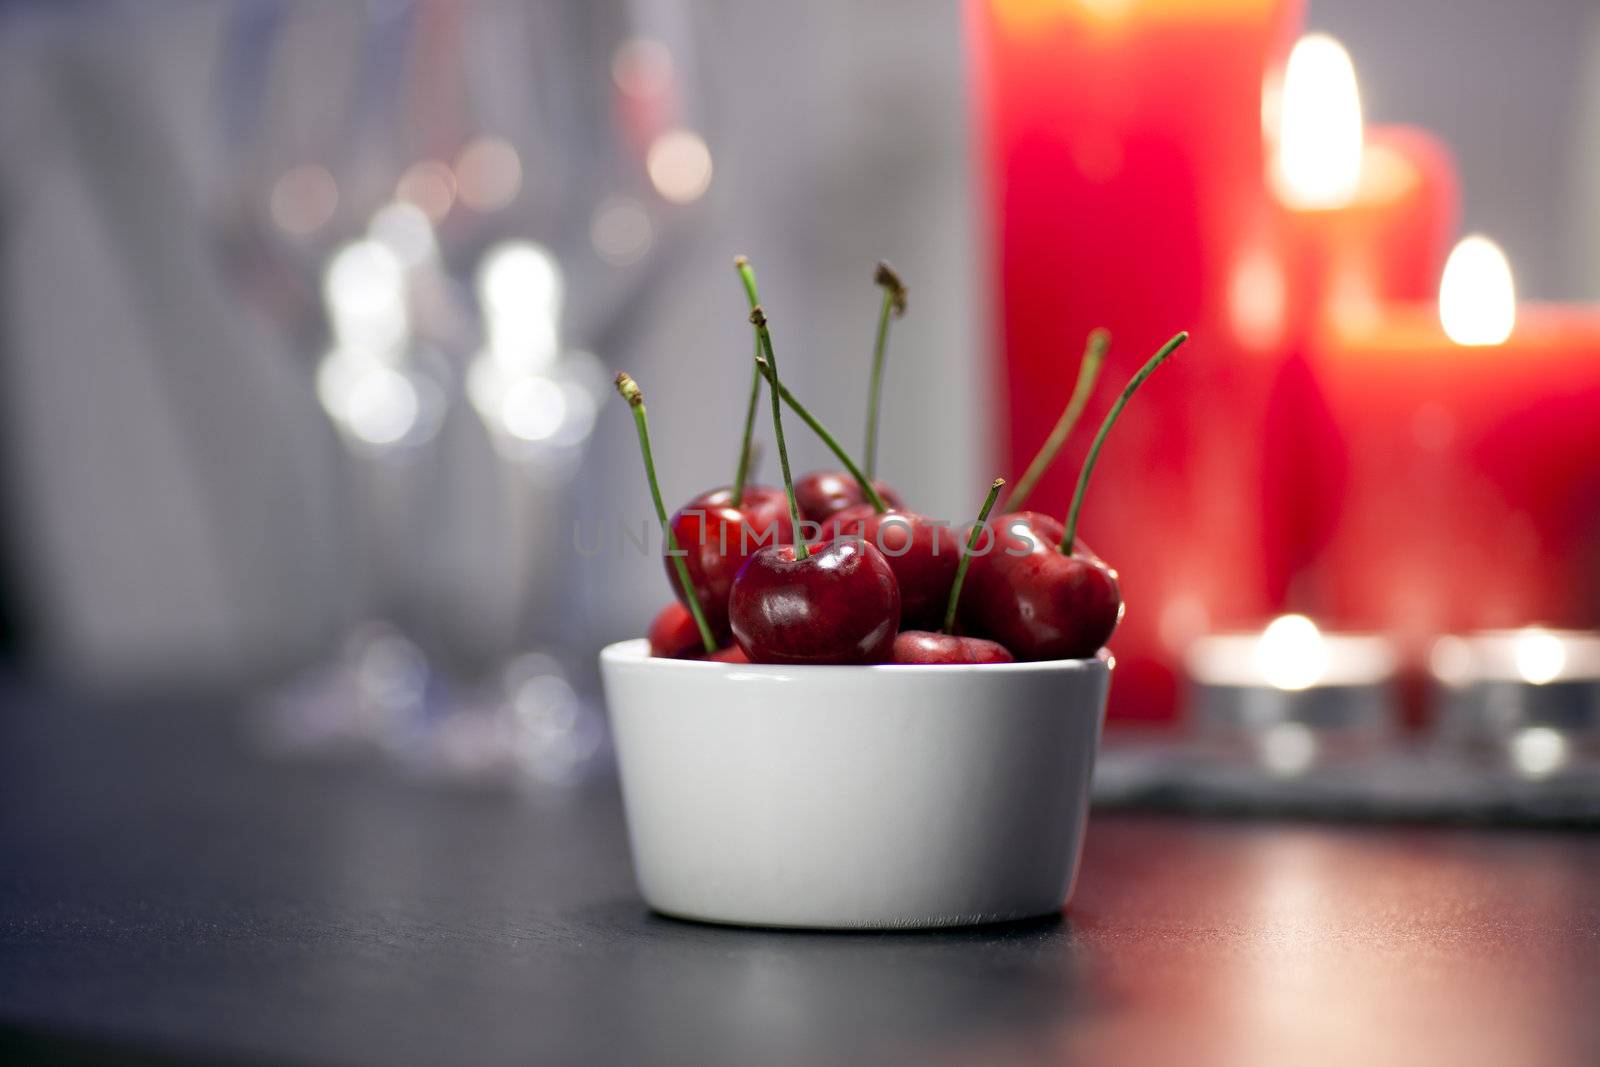 Bowl of cherries on table with candles in distance and shallow depth of field.